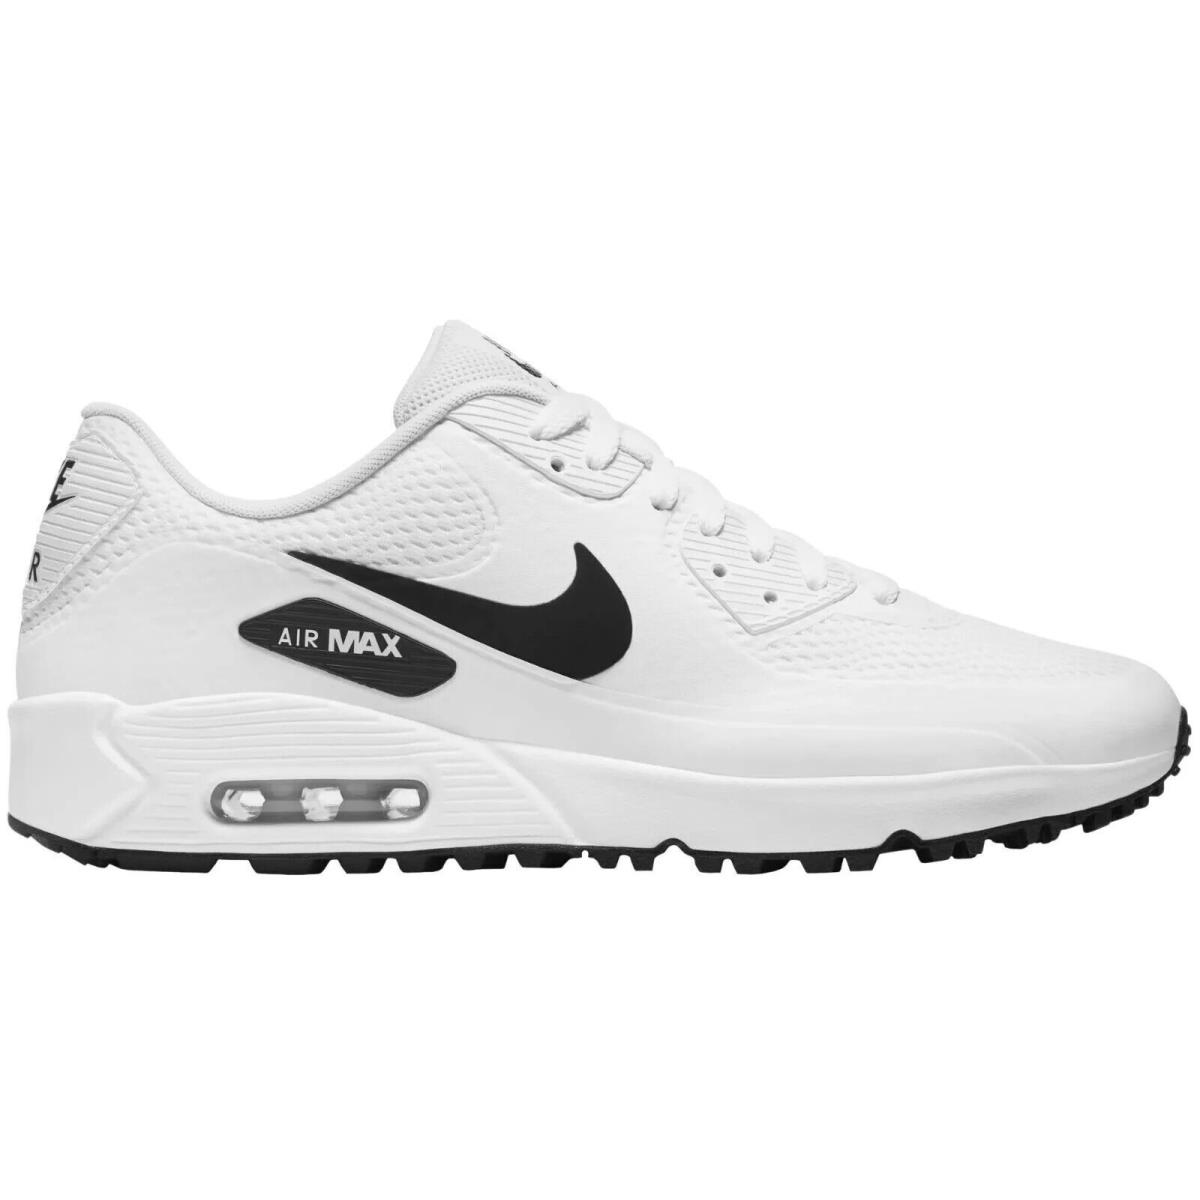 Golf Nike Air Max 90 G Men`s Shoes All Colors US Szs 7-13 White/Black